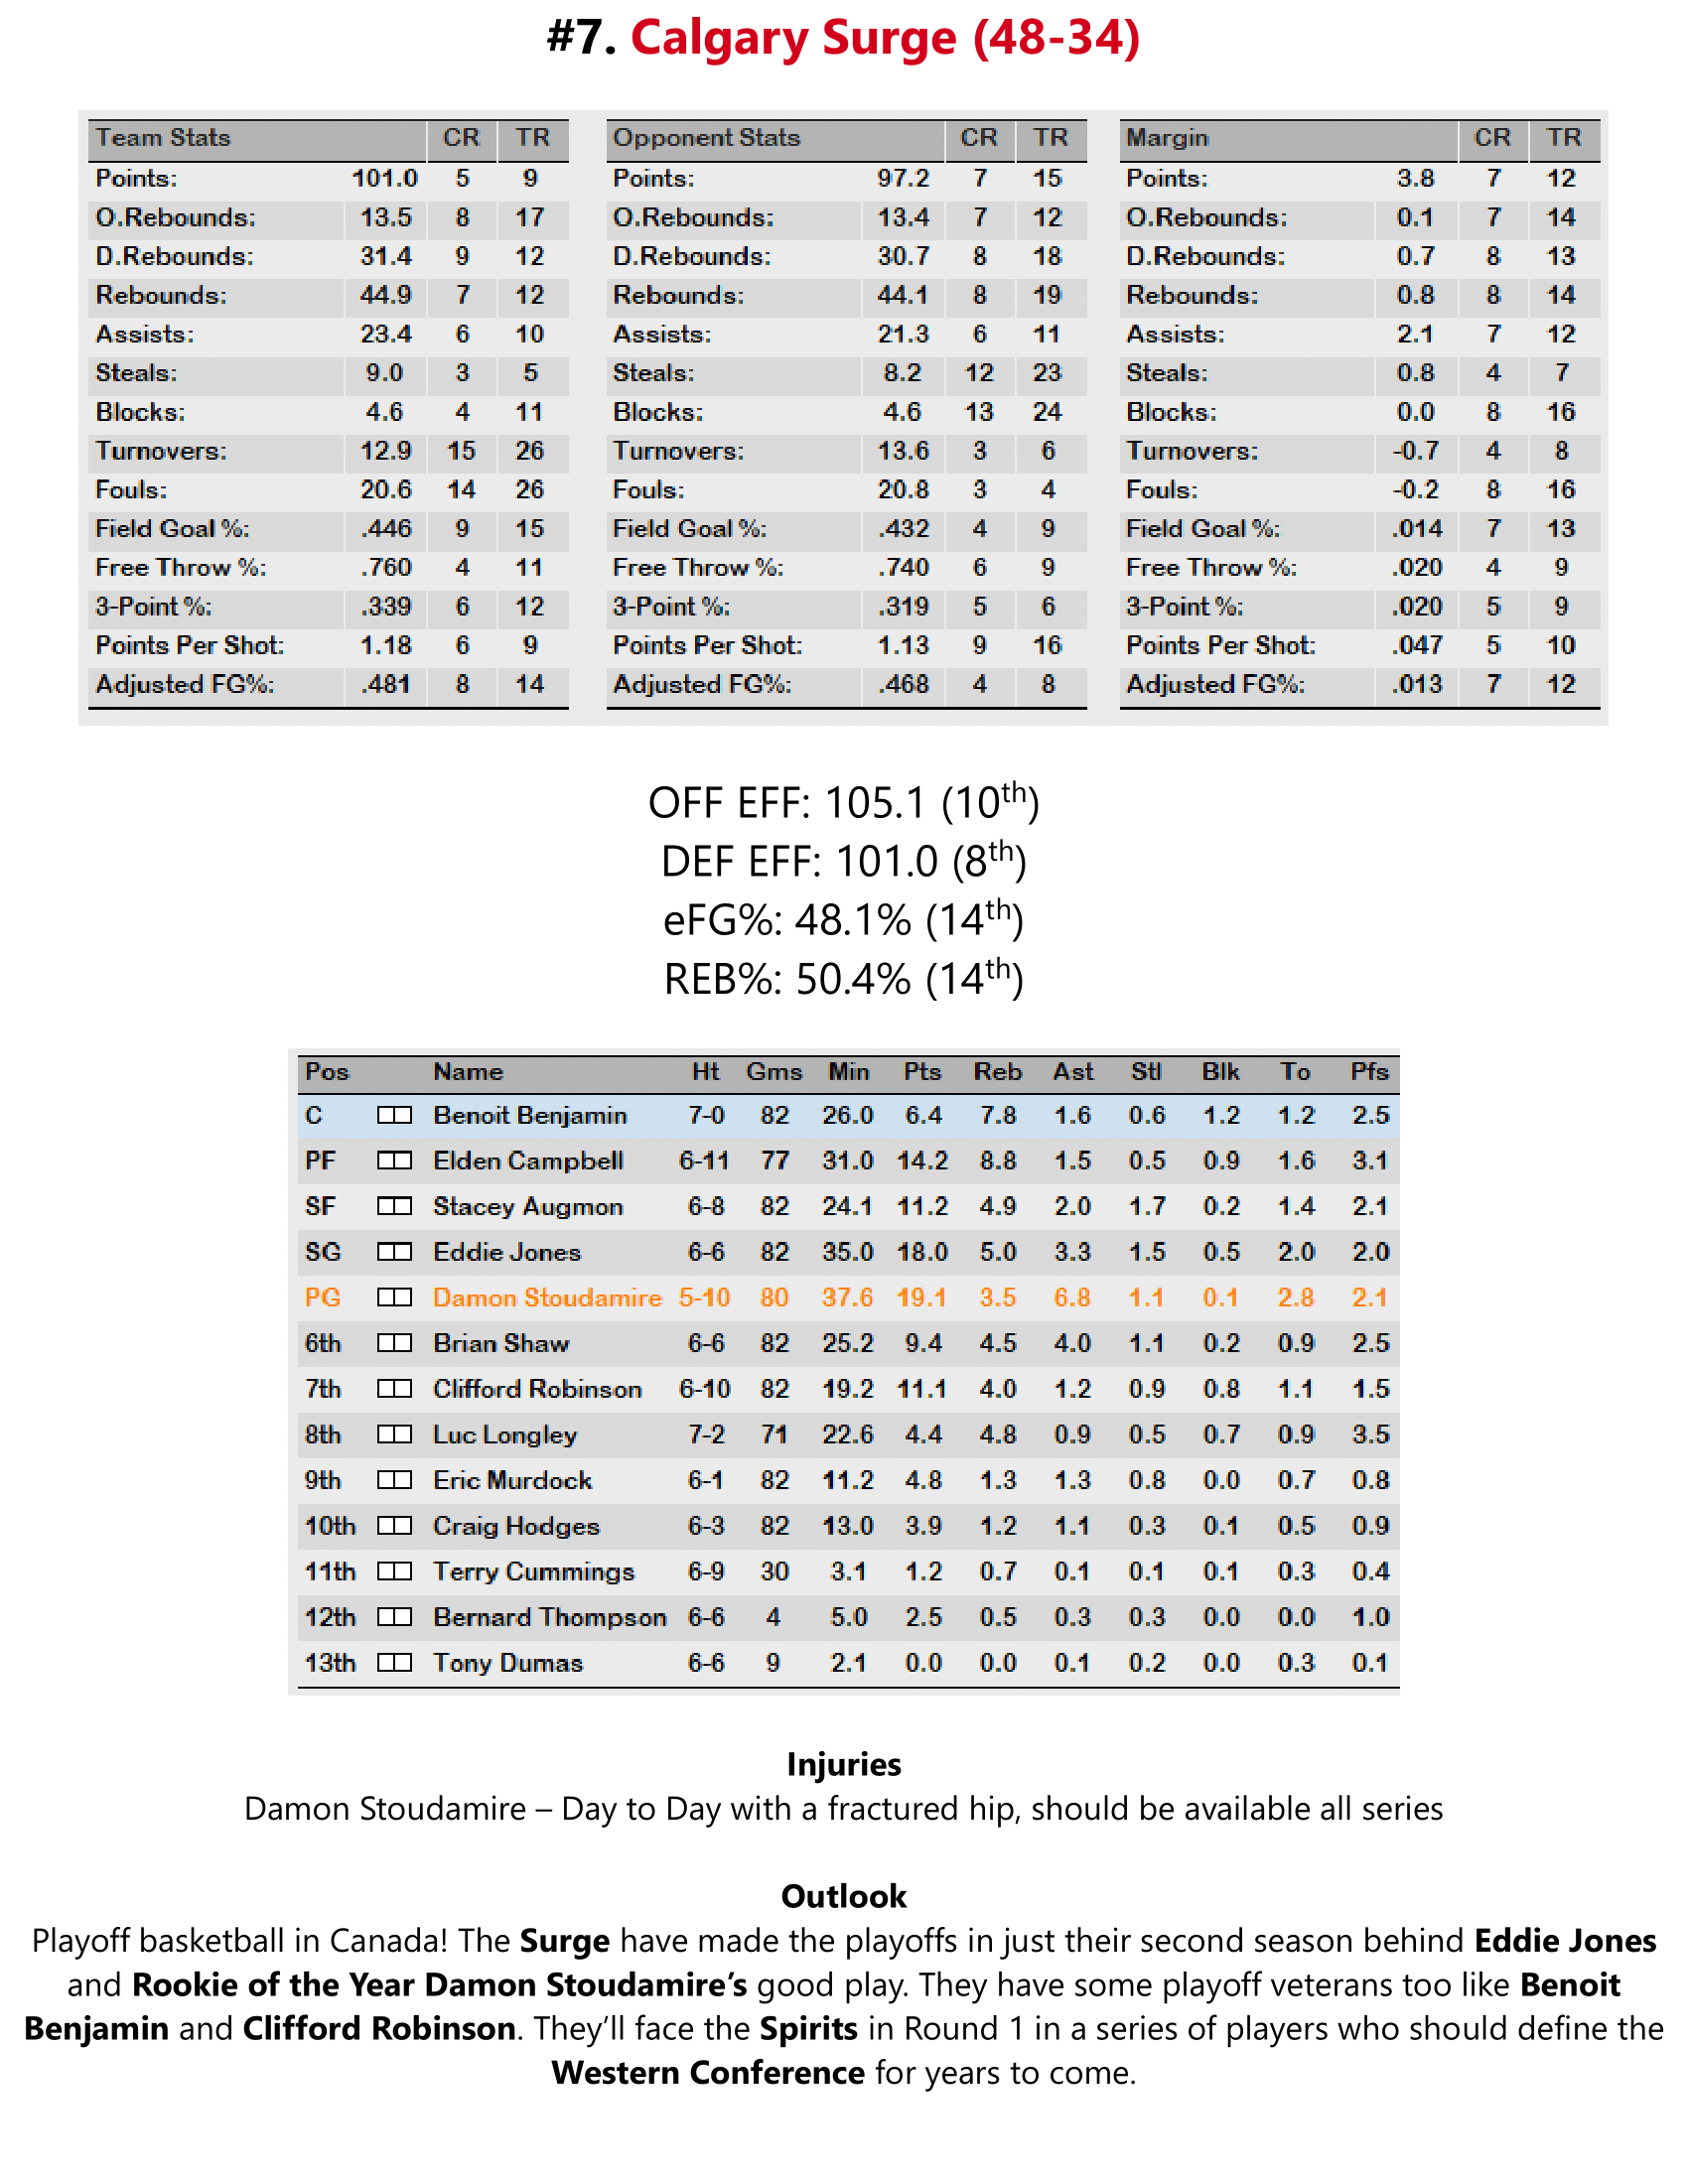 95-96-Part-3-Playoff-Preview-08.png